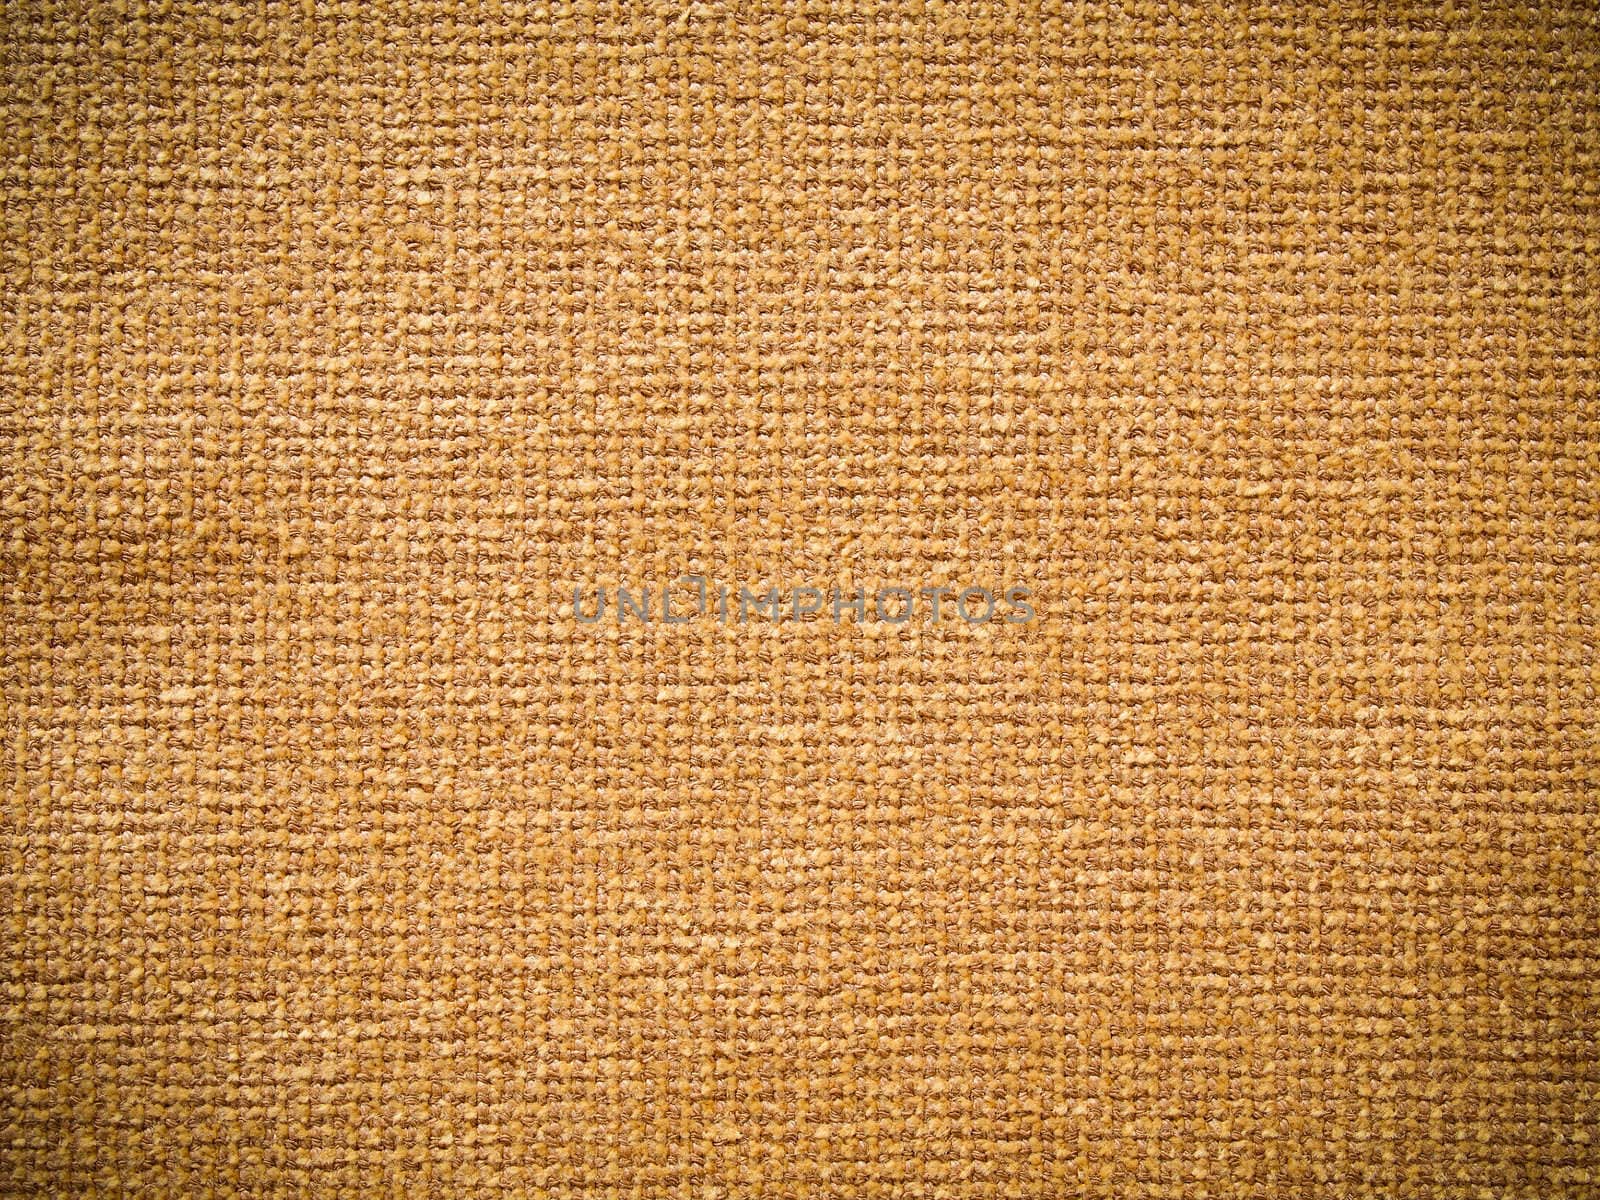 Texture of brown fabric by nuttakit